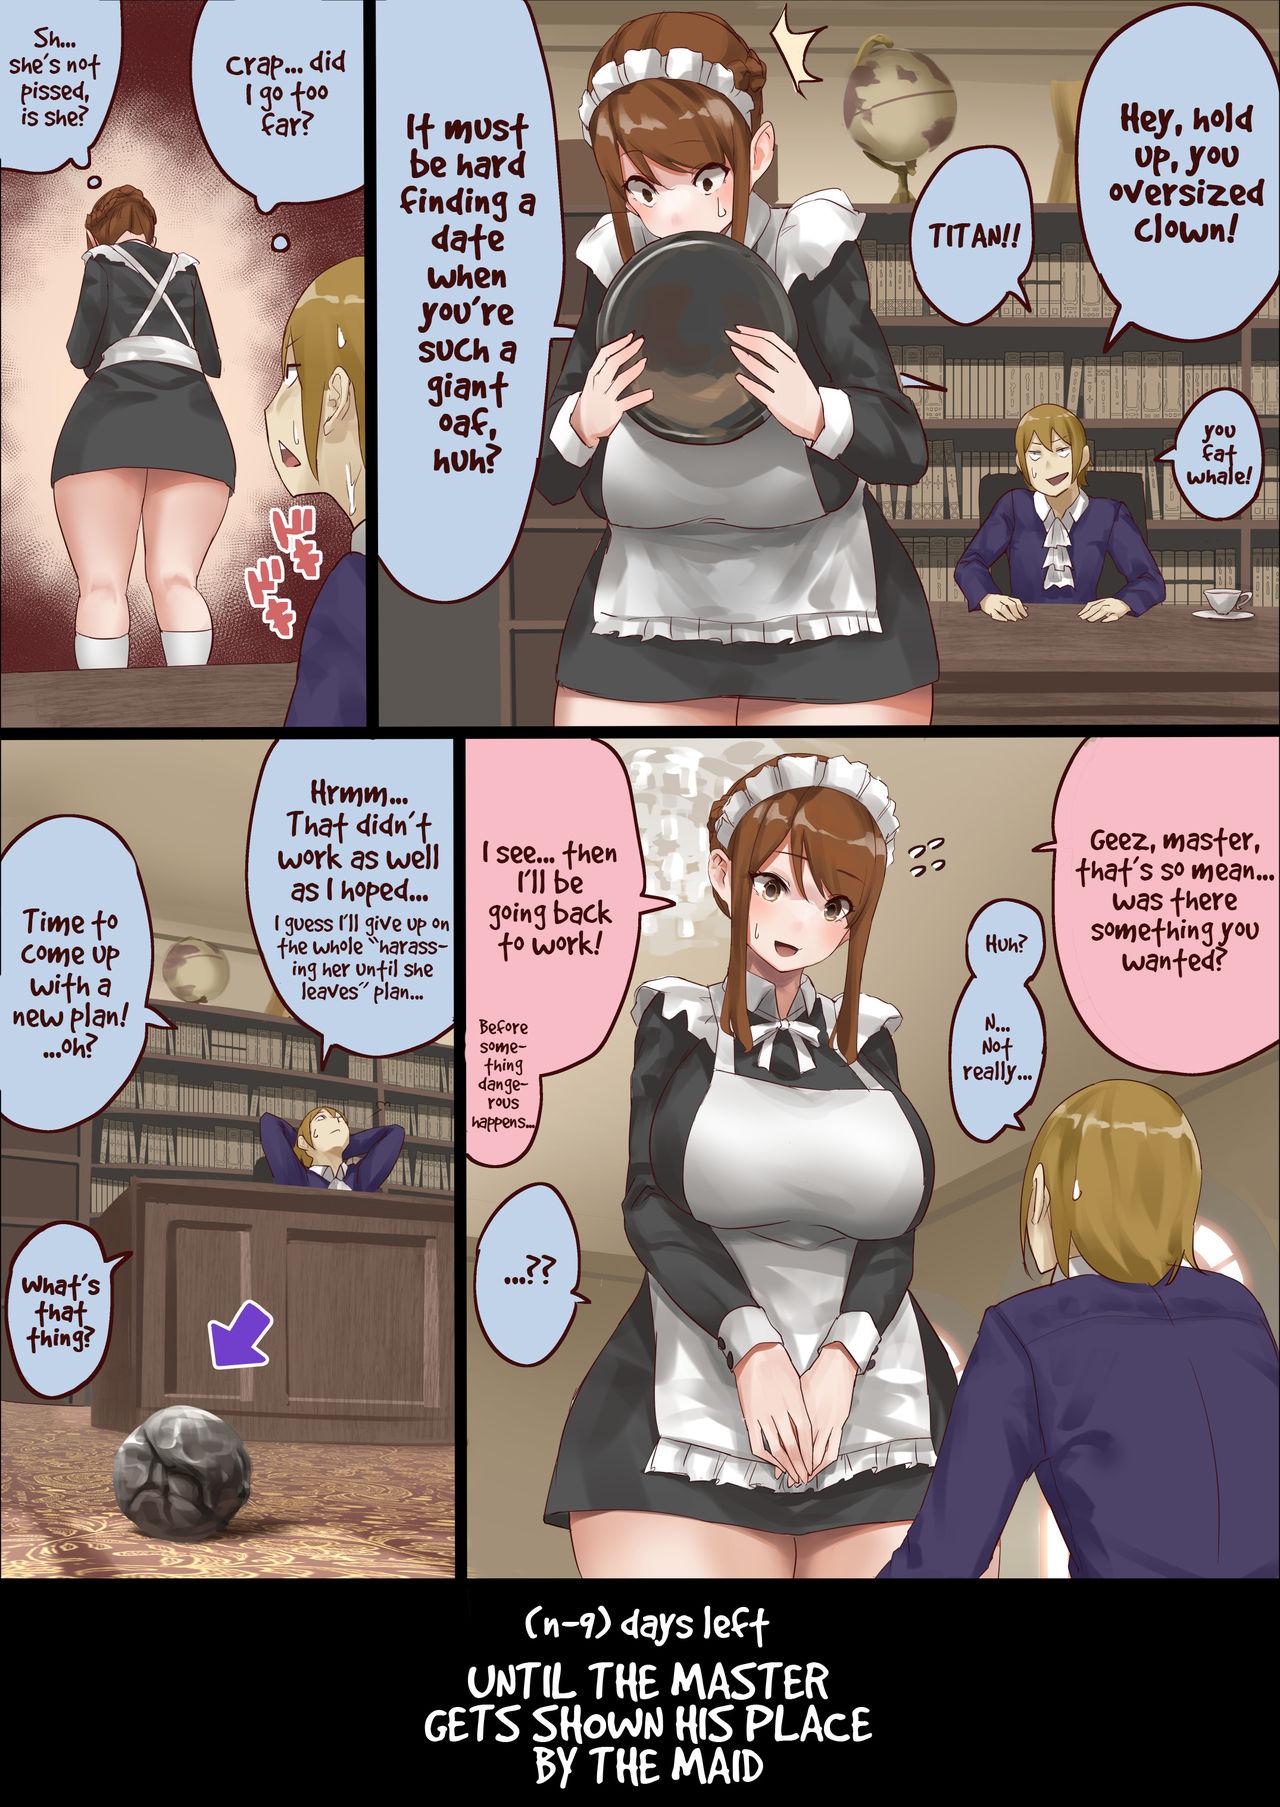 Off master and maid - Original Stretching - Page 10